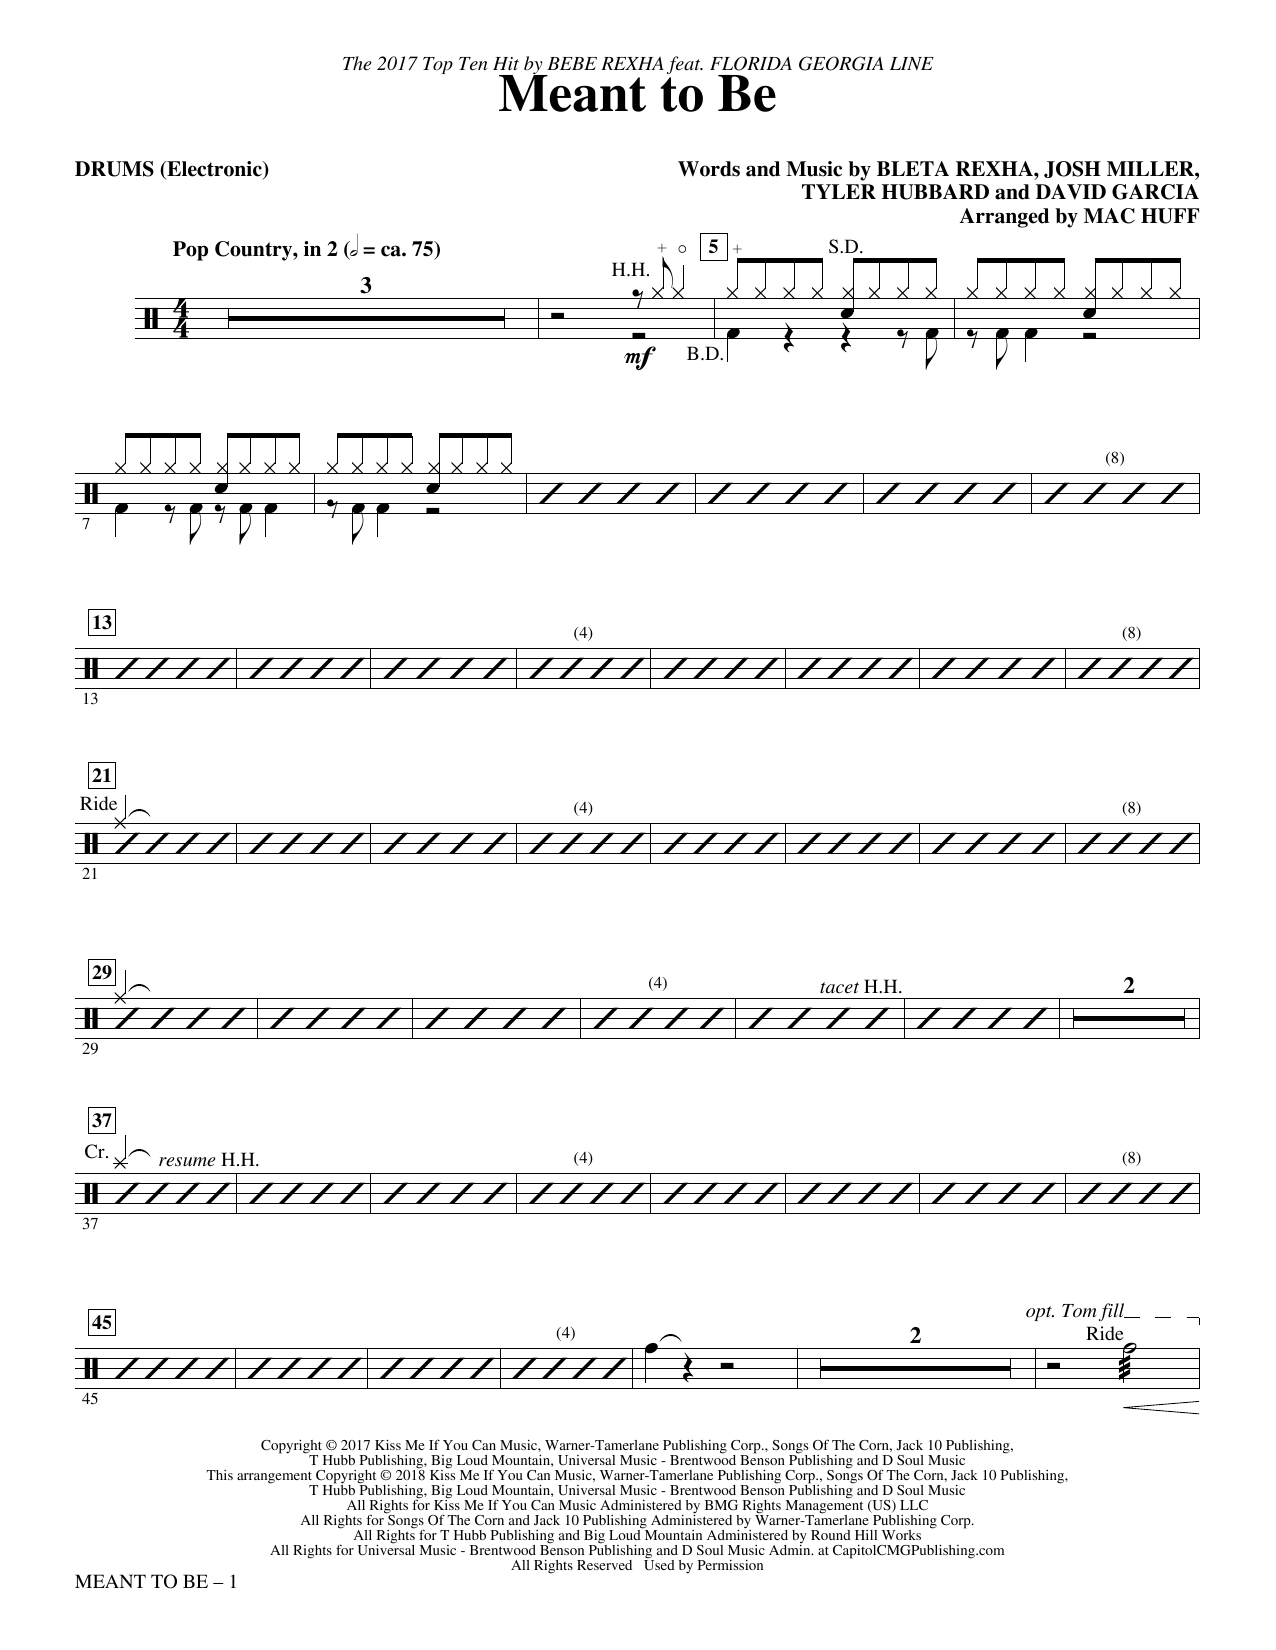 Meant to Be (Feat. Florida Georgia Line) (arr. Mac Huff) - Drums sheet music